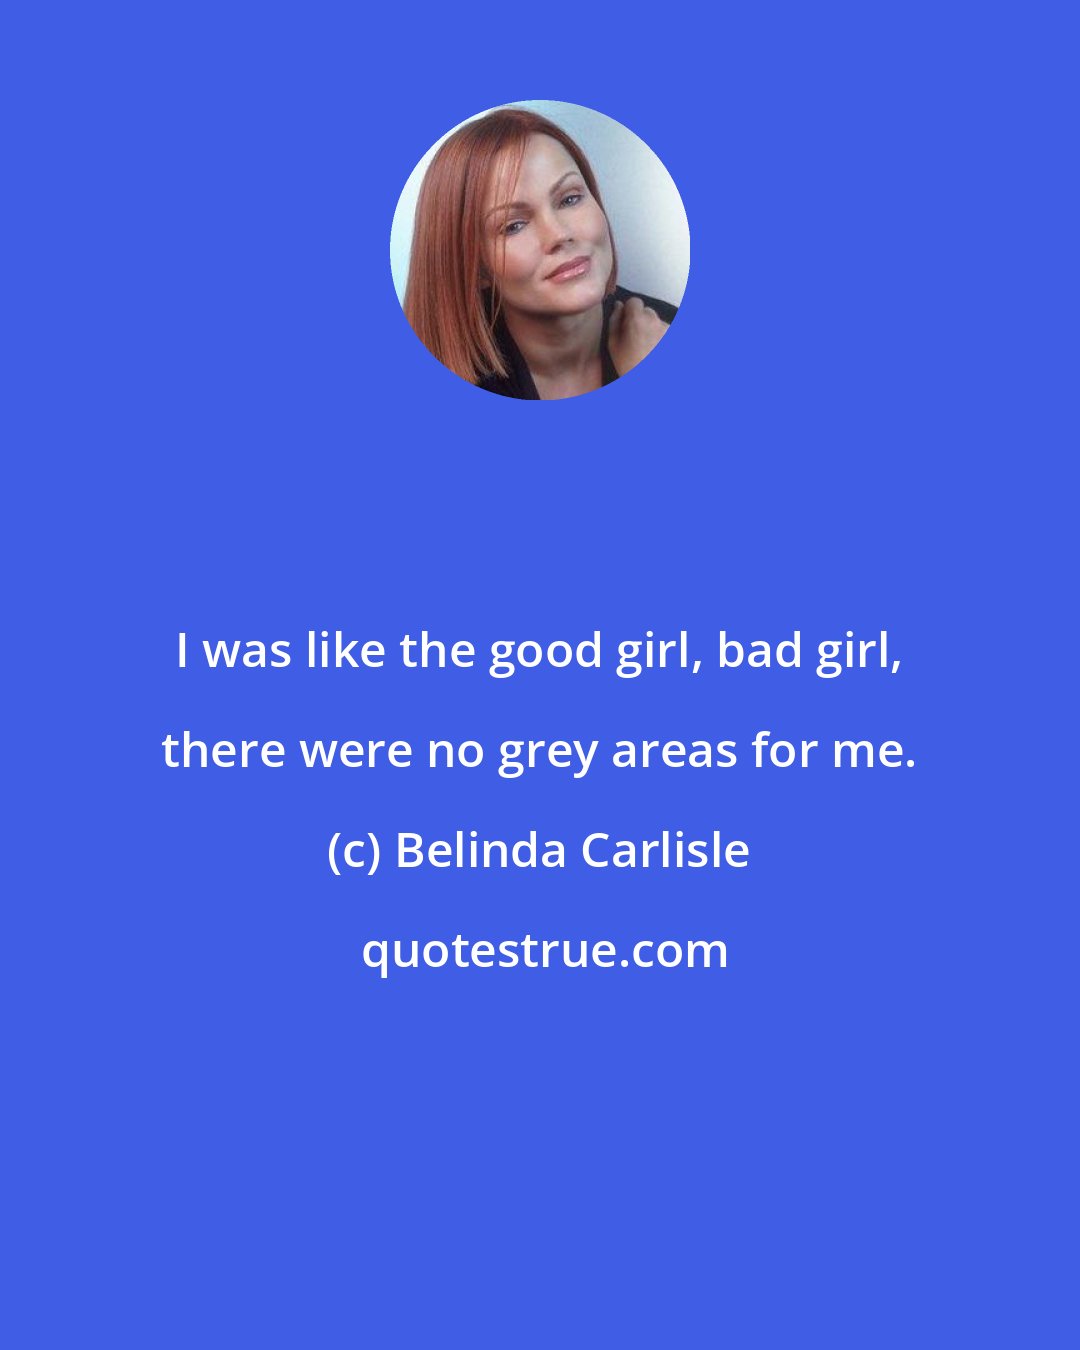 Belinda Carlisle: I was like the good girl, bad girl, there were no grey areas for me.